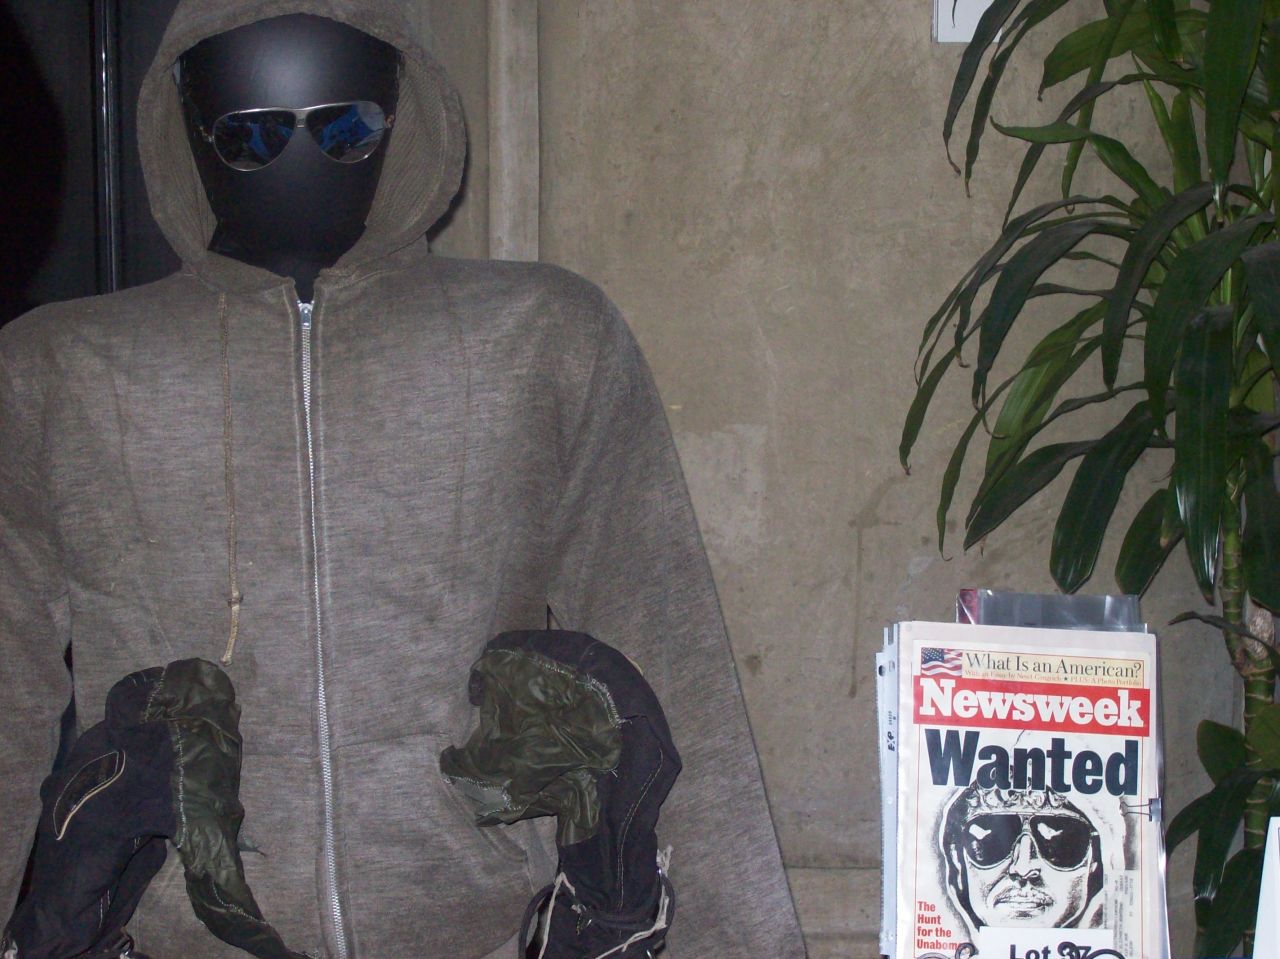 Authorities auctioned Unabomber Ted Kaczynski's personal items in May 2011, including his signature hoodie. The proceeds were used to compensate some of his victims.